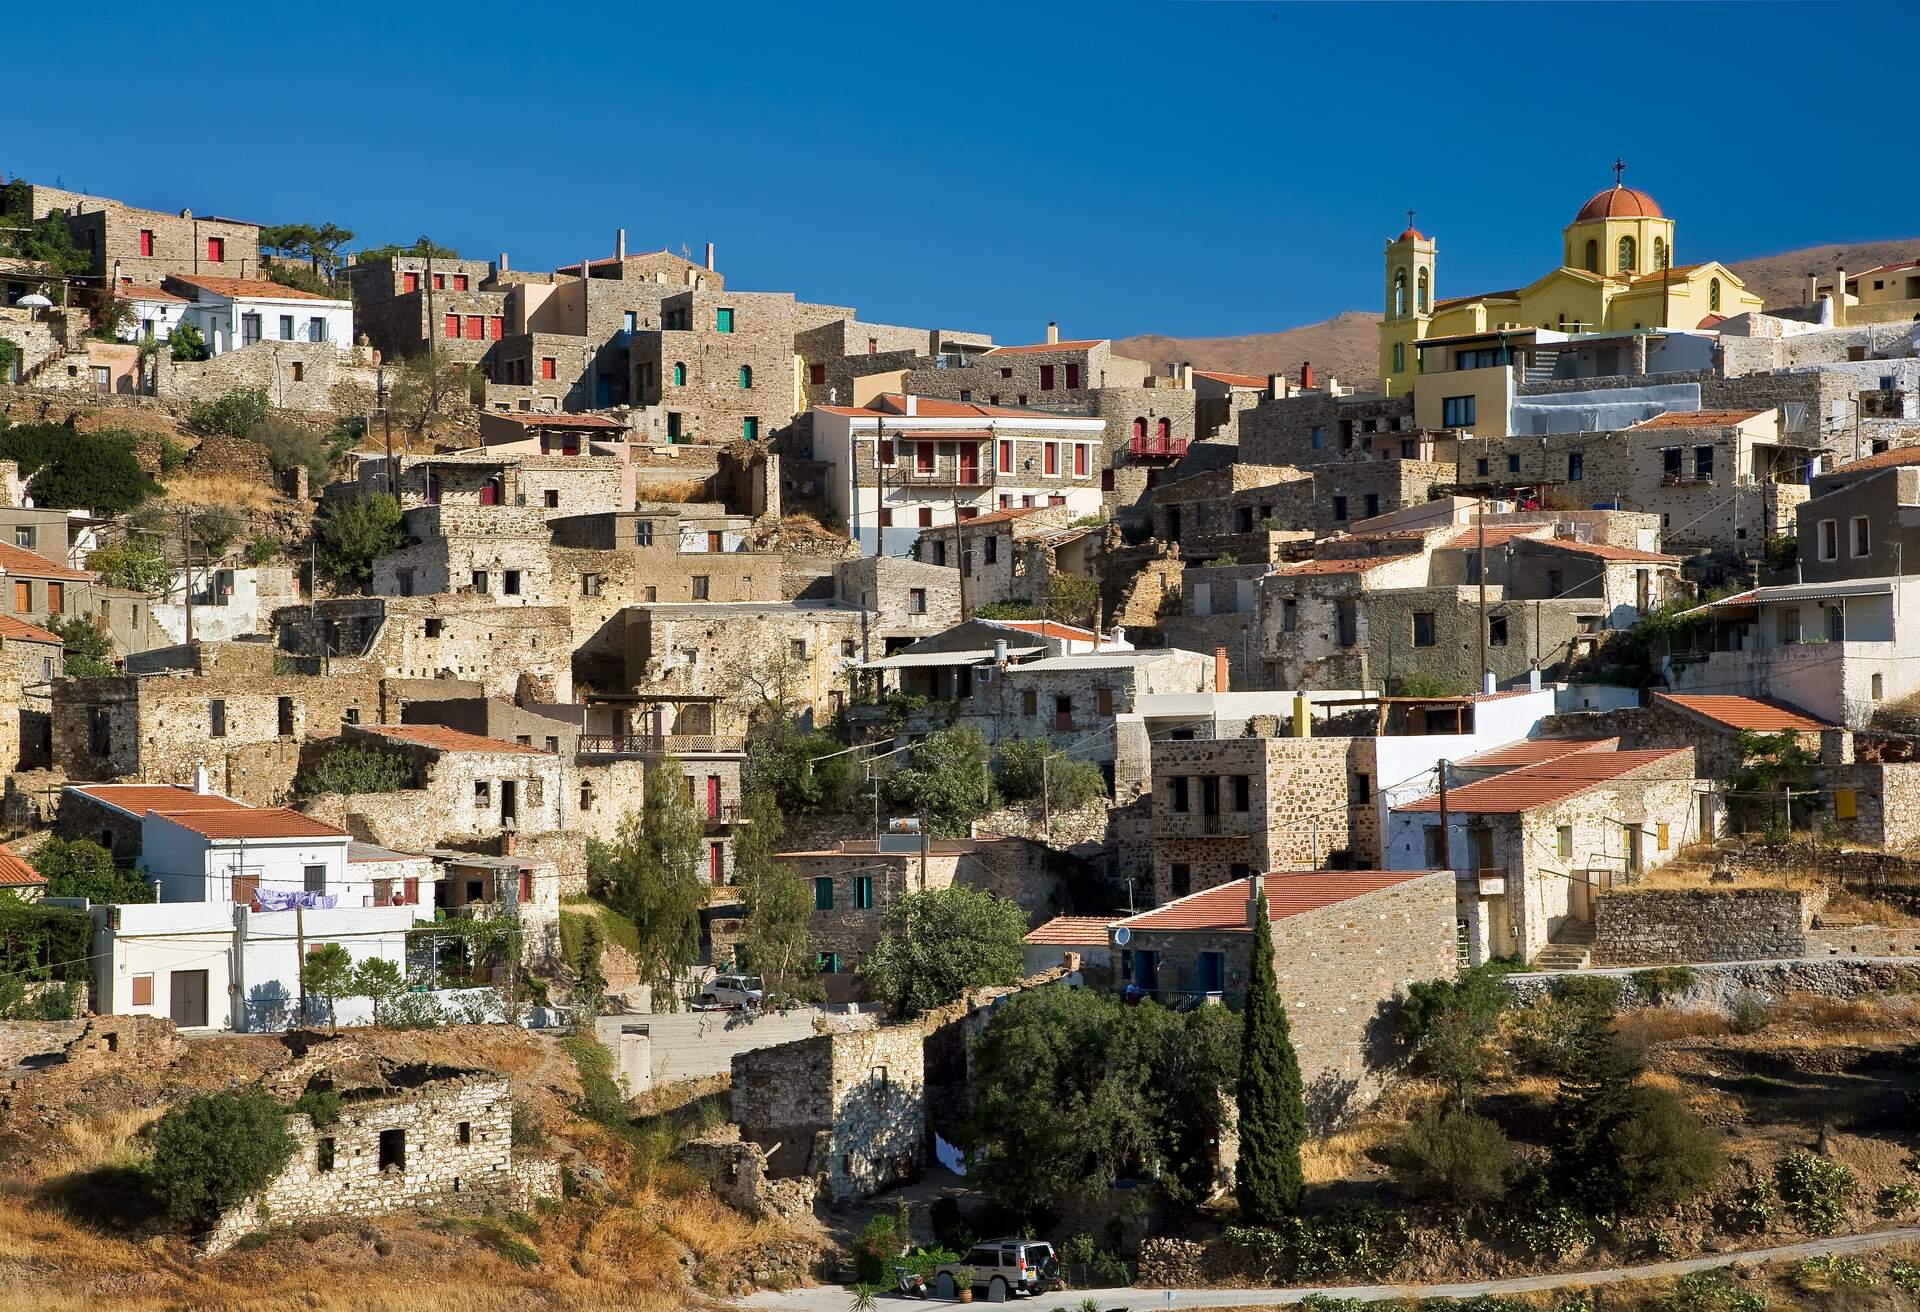 A view of Chios Village in Chios Island, Greece